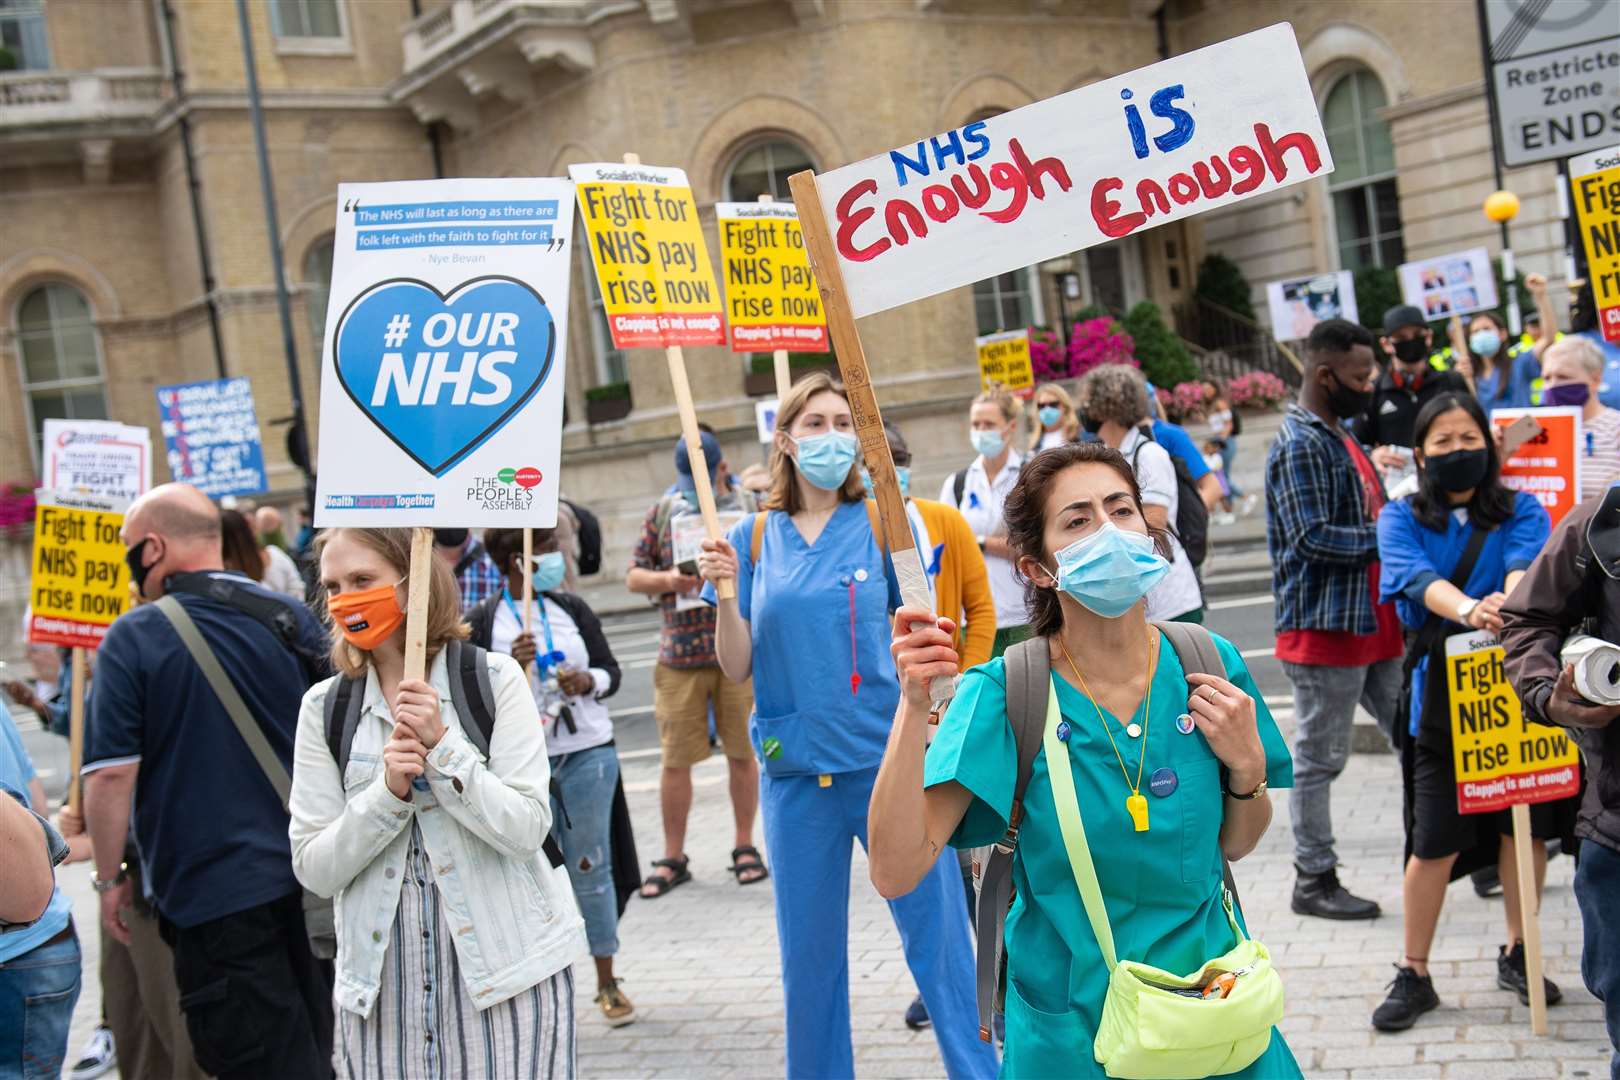 NHS staff and supporters take part in a protest march in central London (Dominic Lipinski/PA)